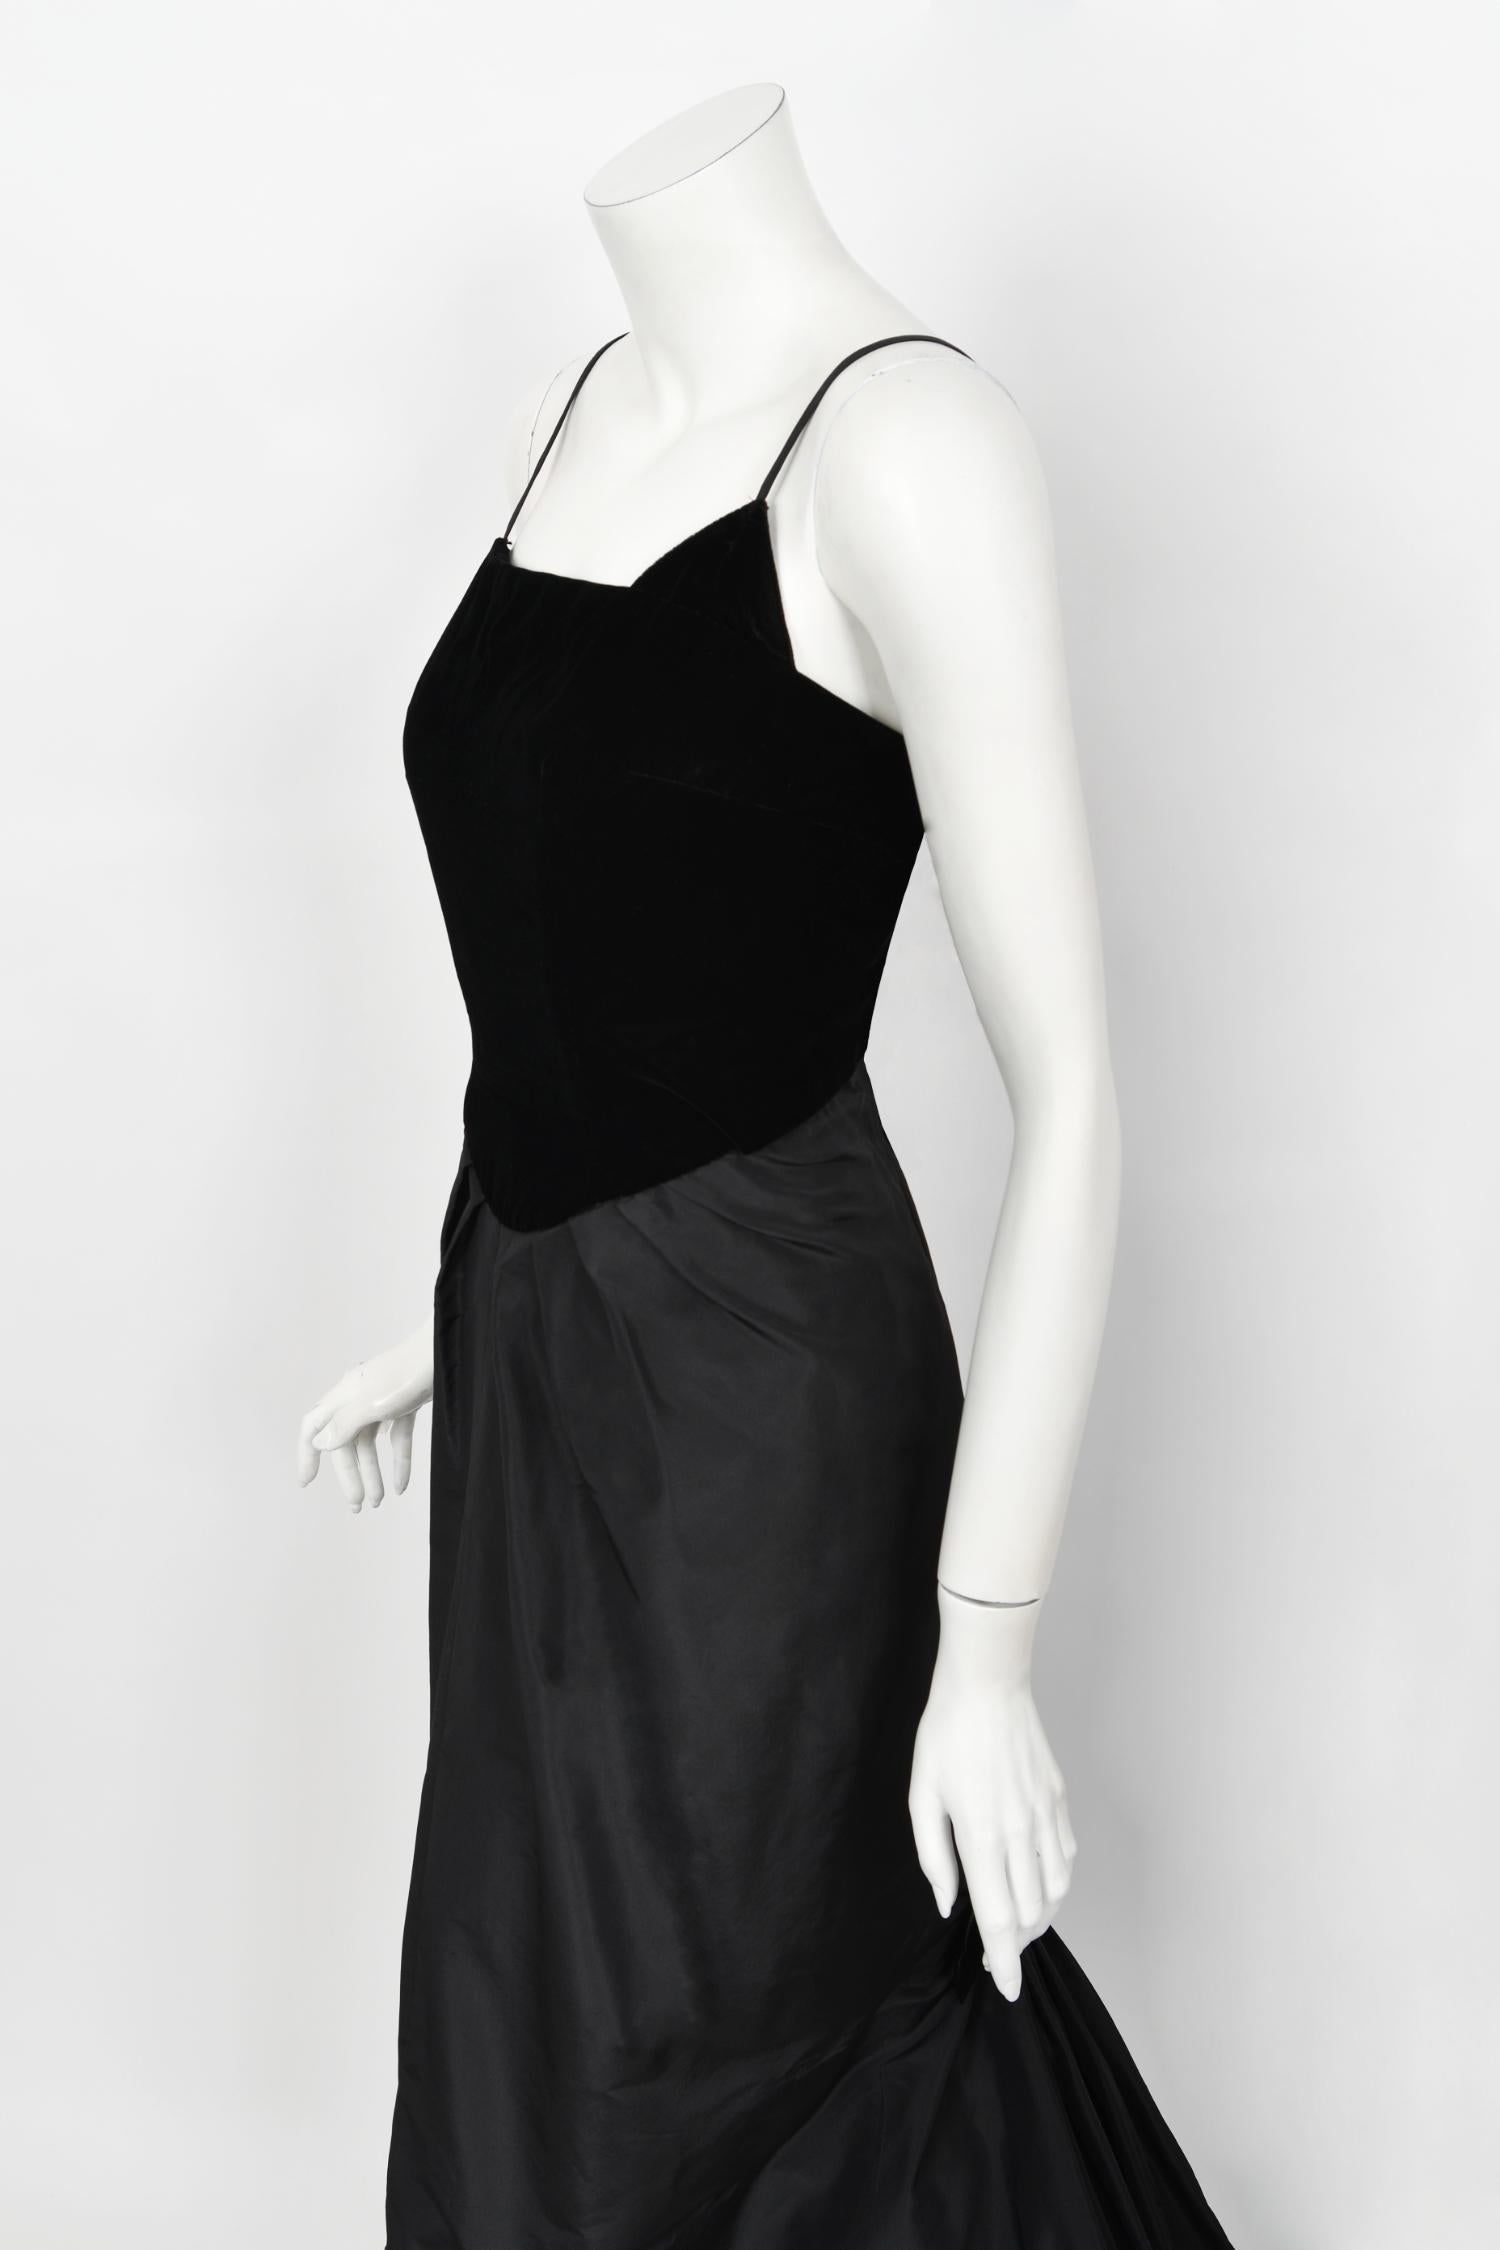 Vintage 1950's Philip Hulitar Old Hollywood Black Silk Hourglass Fishtail Dress For Sale 5